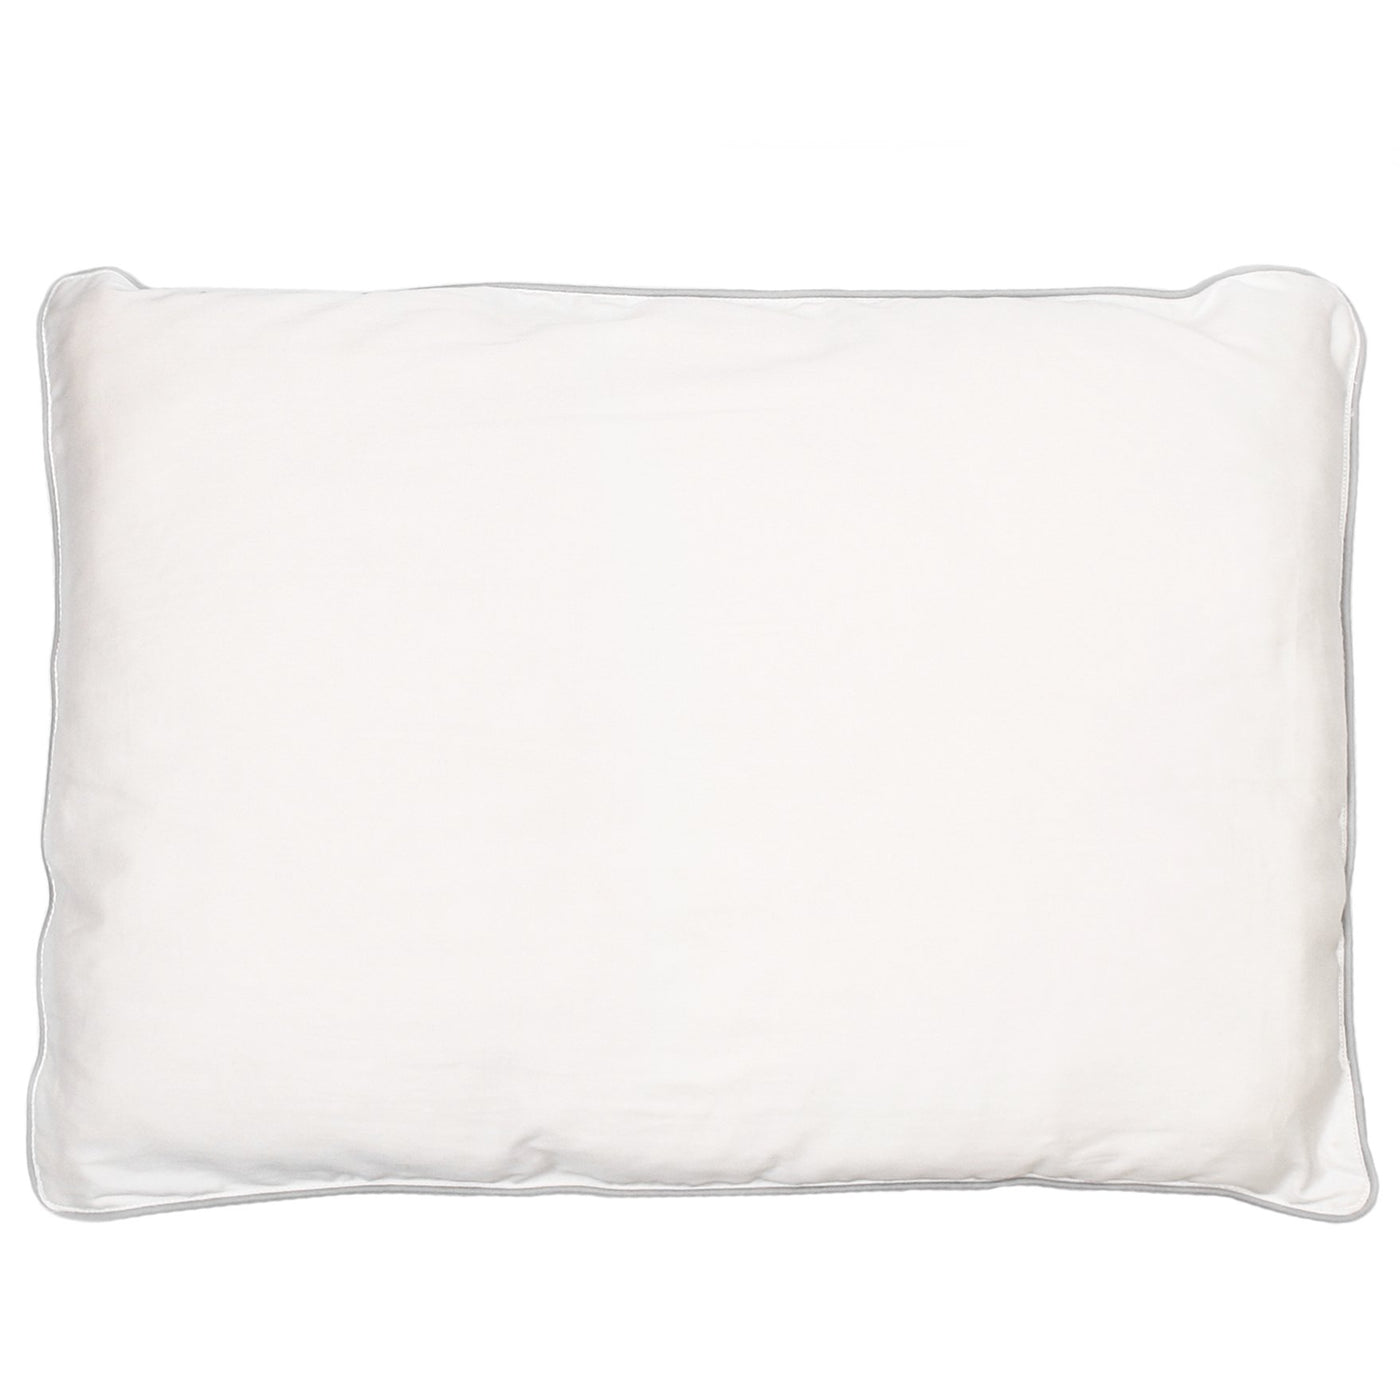 Imperfect Wool Pillow, Toddler and Kids, Size: 14"x19"